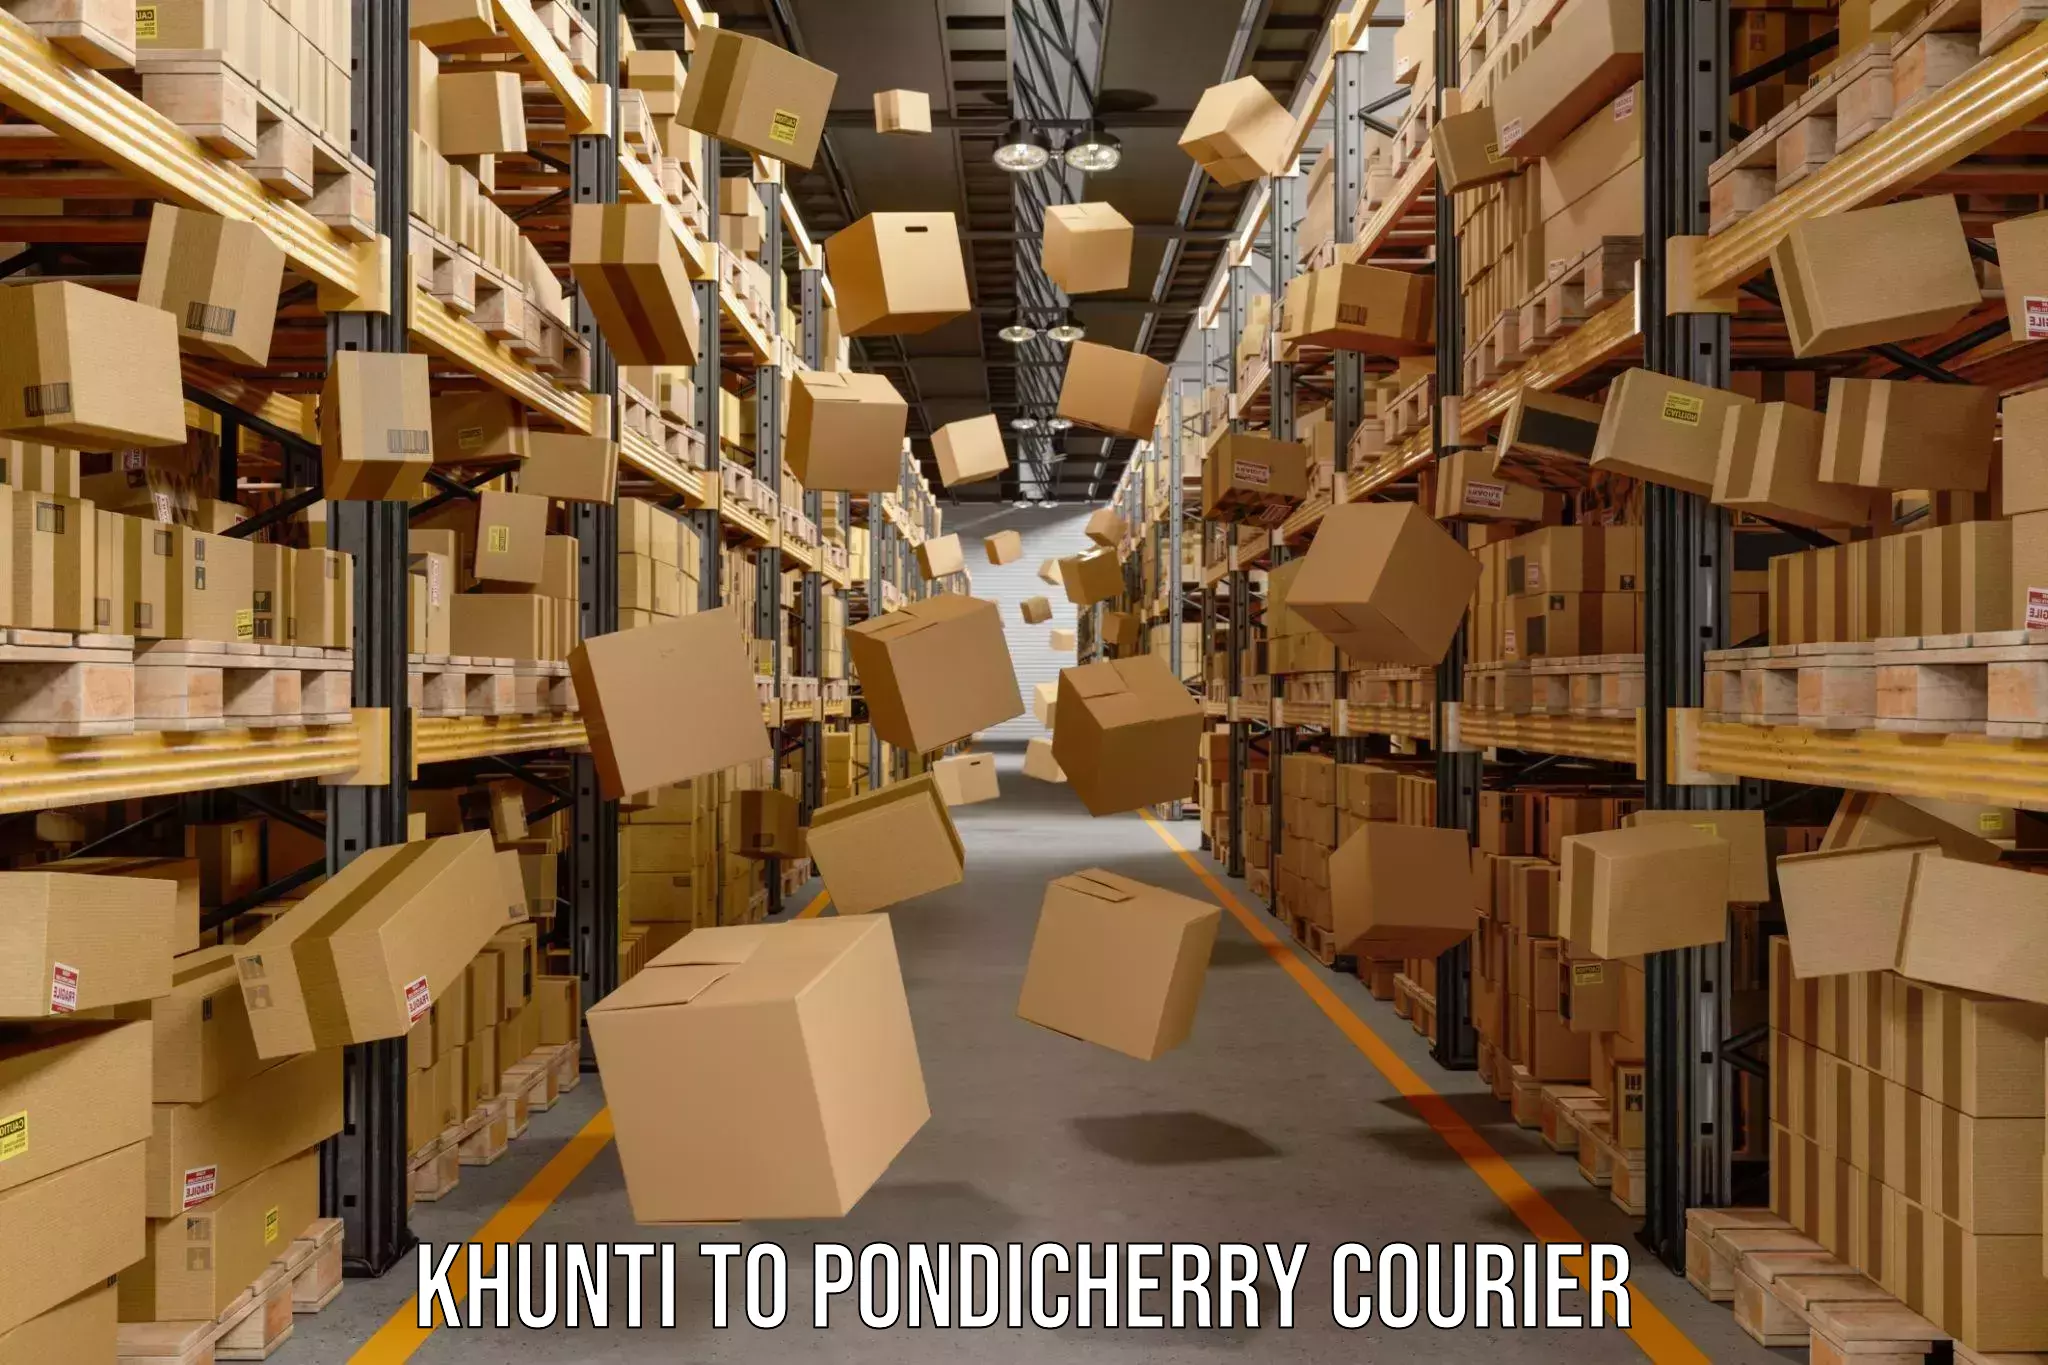 24-hour courier service Khunti to Pondicherry